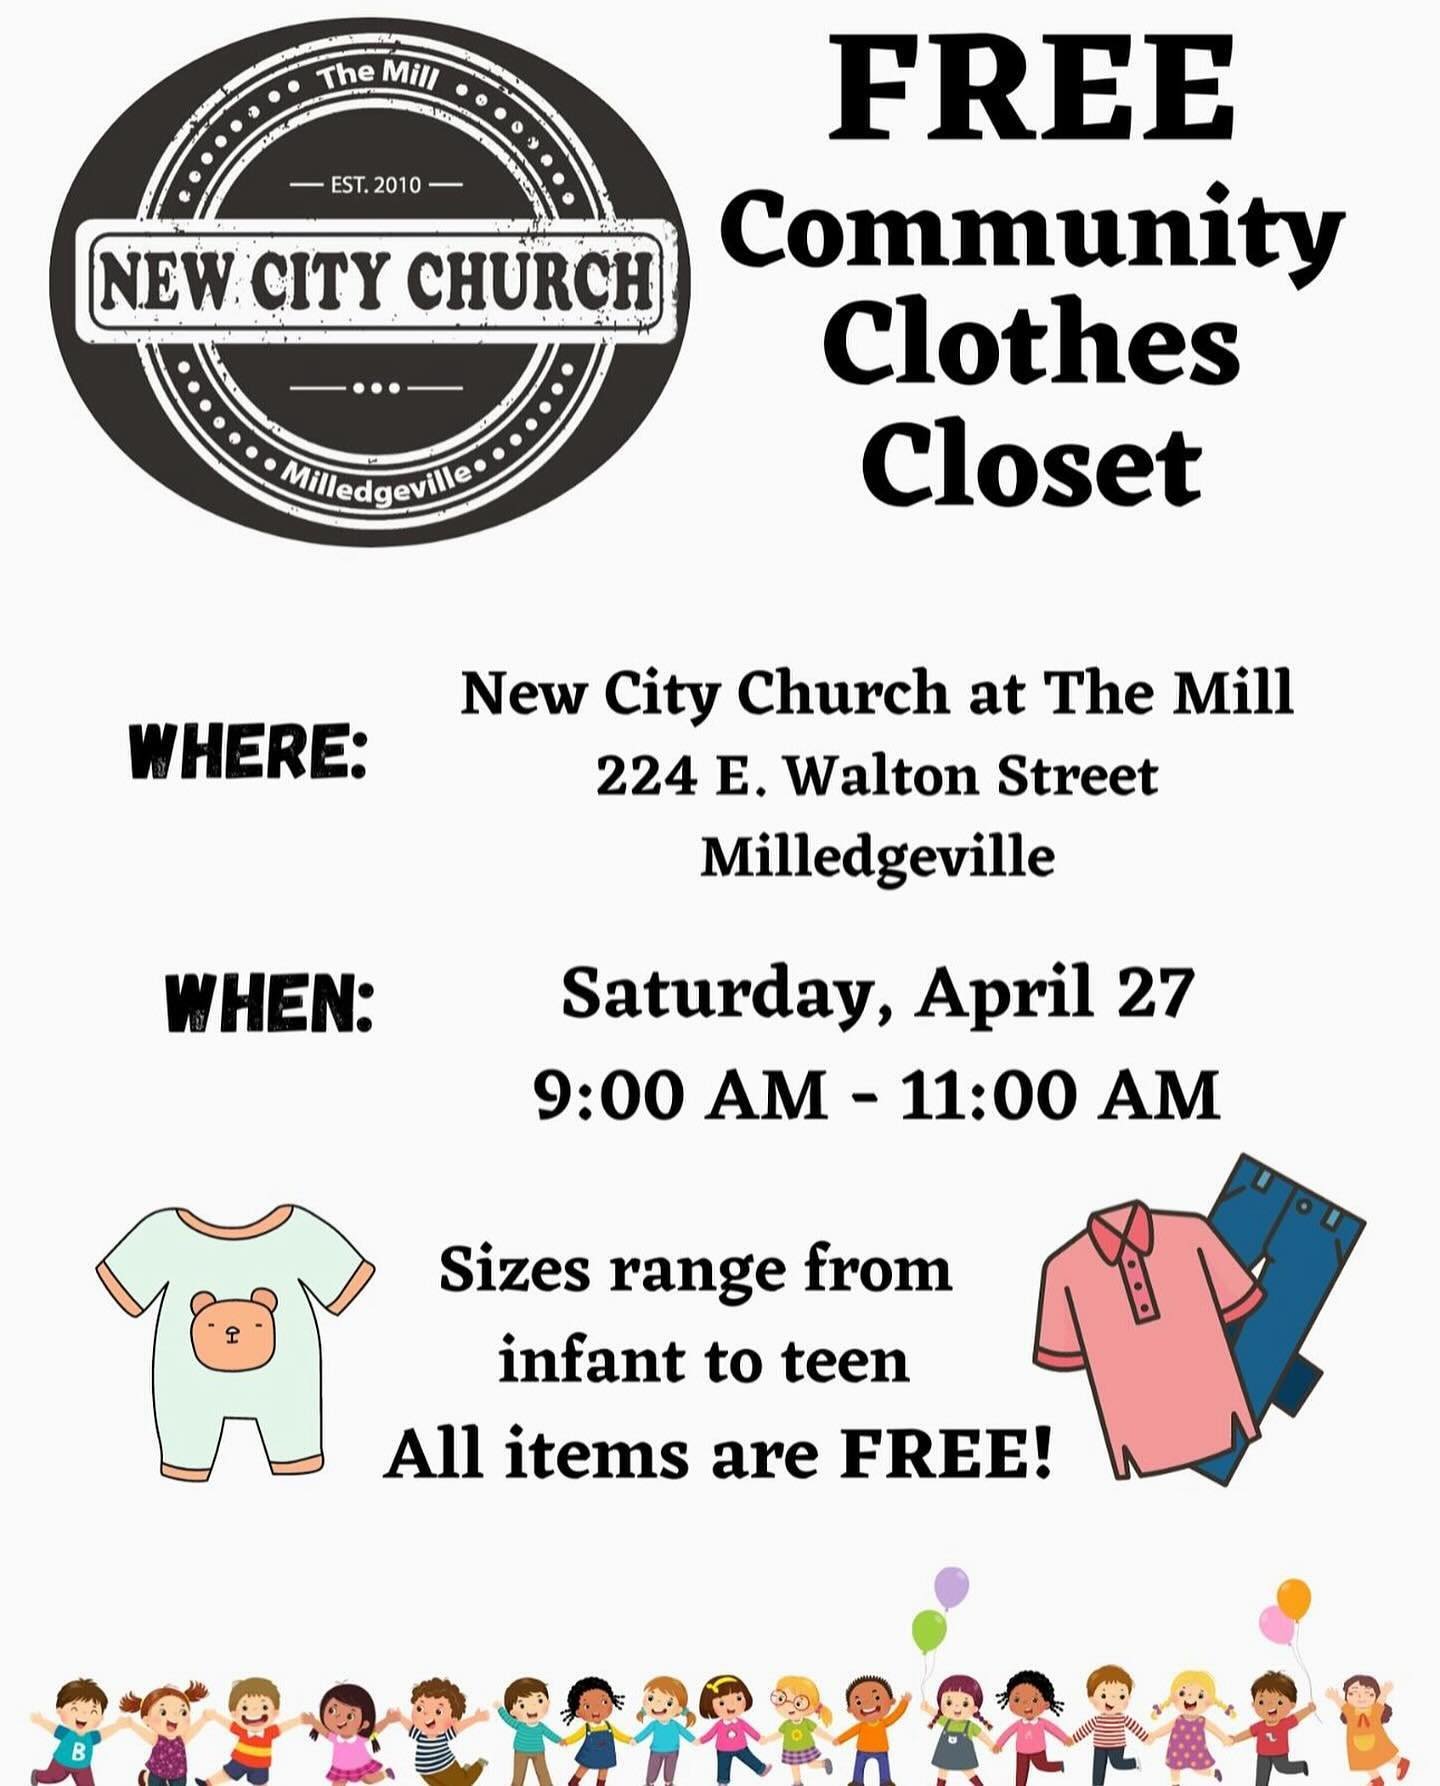 NEW CITY CLOTHING CLOSET OPENING AGAIN
&bull;
New City at The Mill is happy to announce we will be opening our clothing closet again! We would like to open this closet to anybody in the community: foster families, community surrounding the Mill, the 